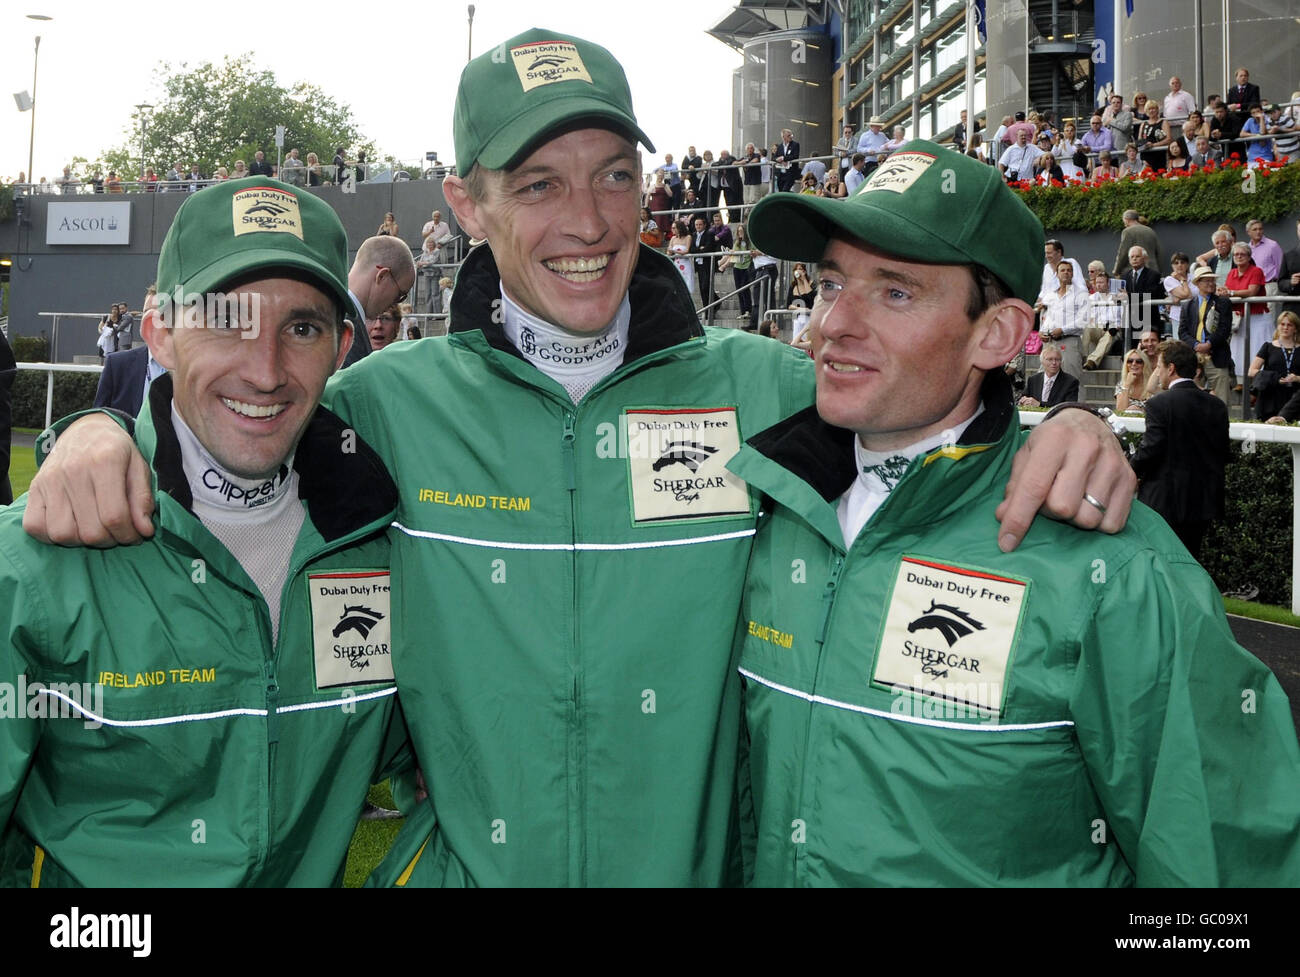 Ireland win the team event with (left to right) Neil Callan, Richard Hughes and Seamus Heffernan during the The Dubai Duty Free Shergar Cup Day at Ascot Racecourse, Berkshire. Stock Photo